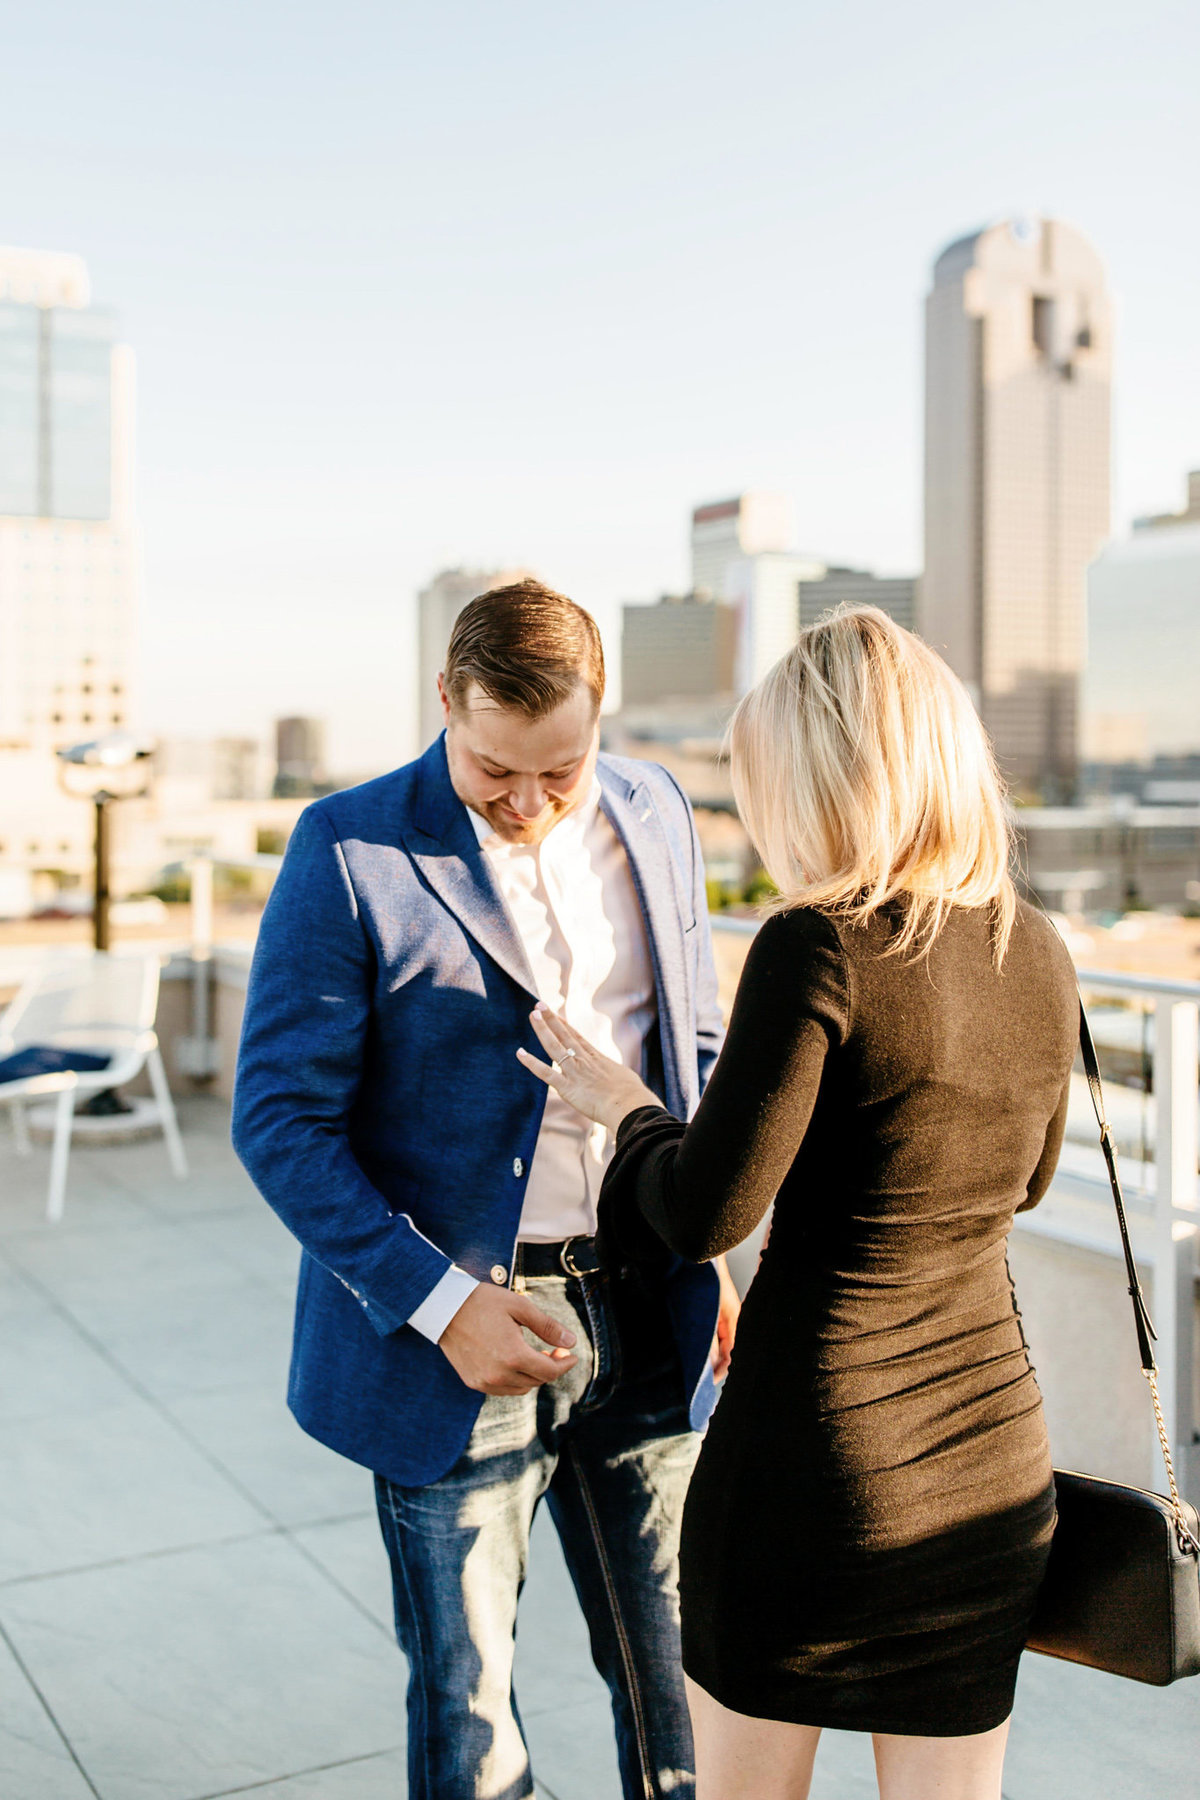 Eric & Megan - Downtown Dallas Rooftop Proposal & Engagement Session-50